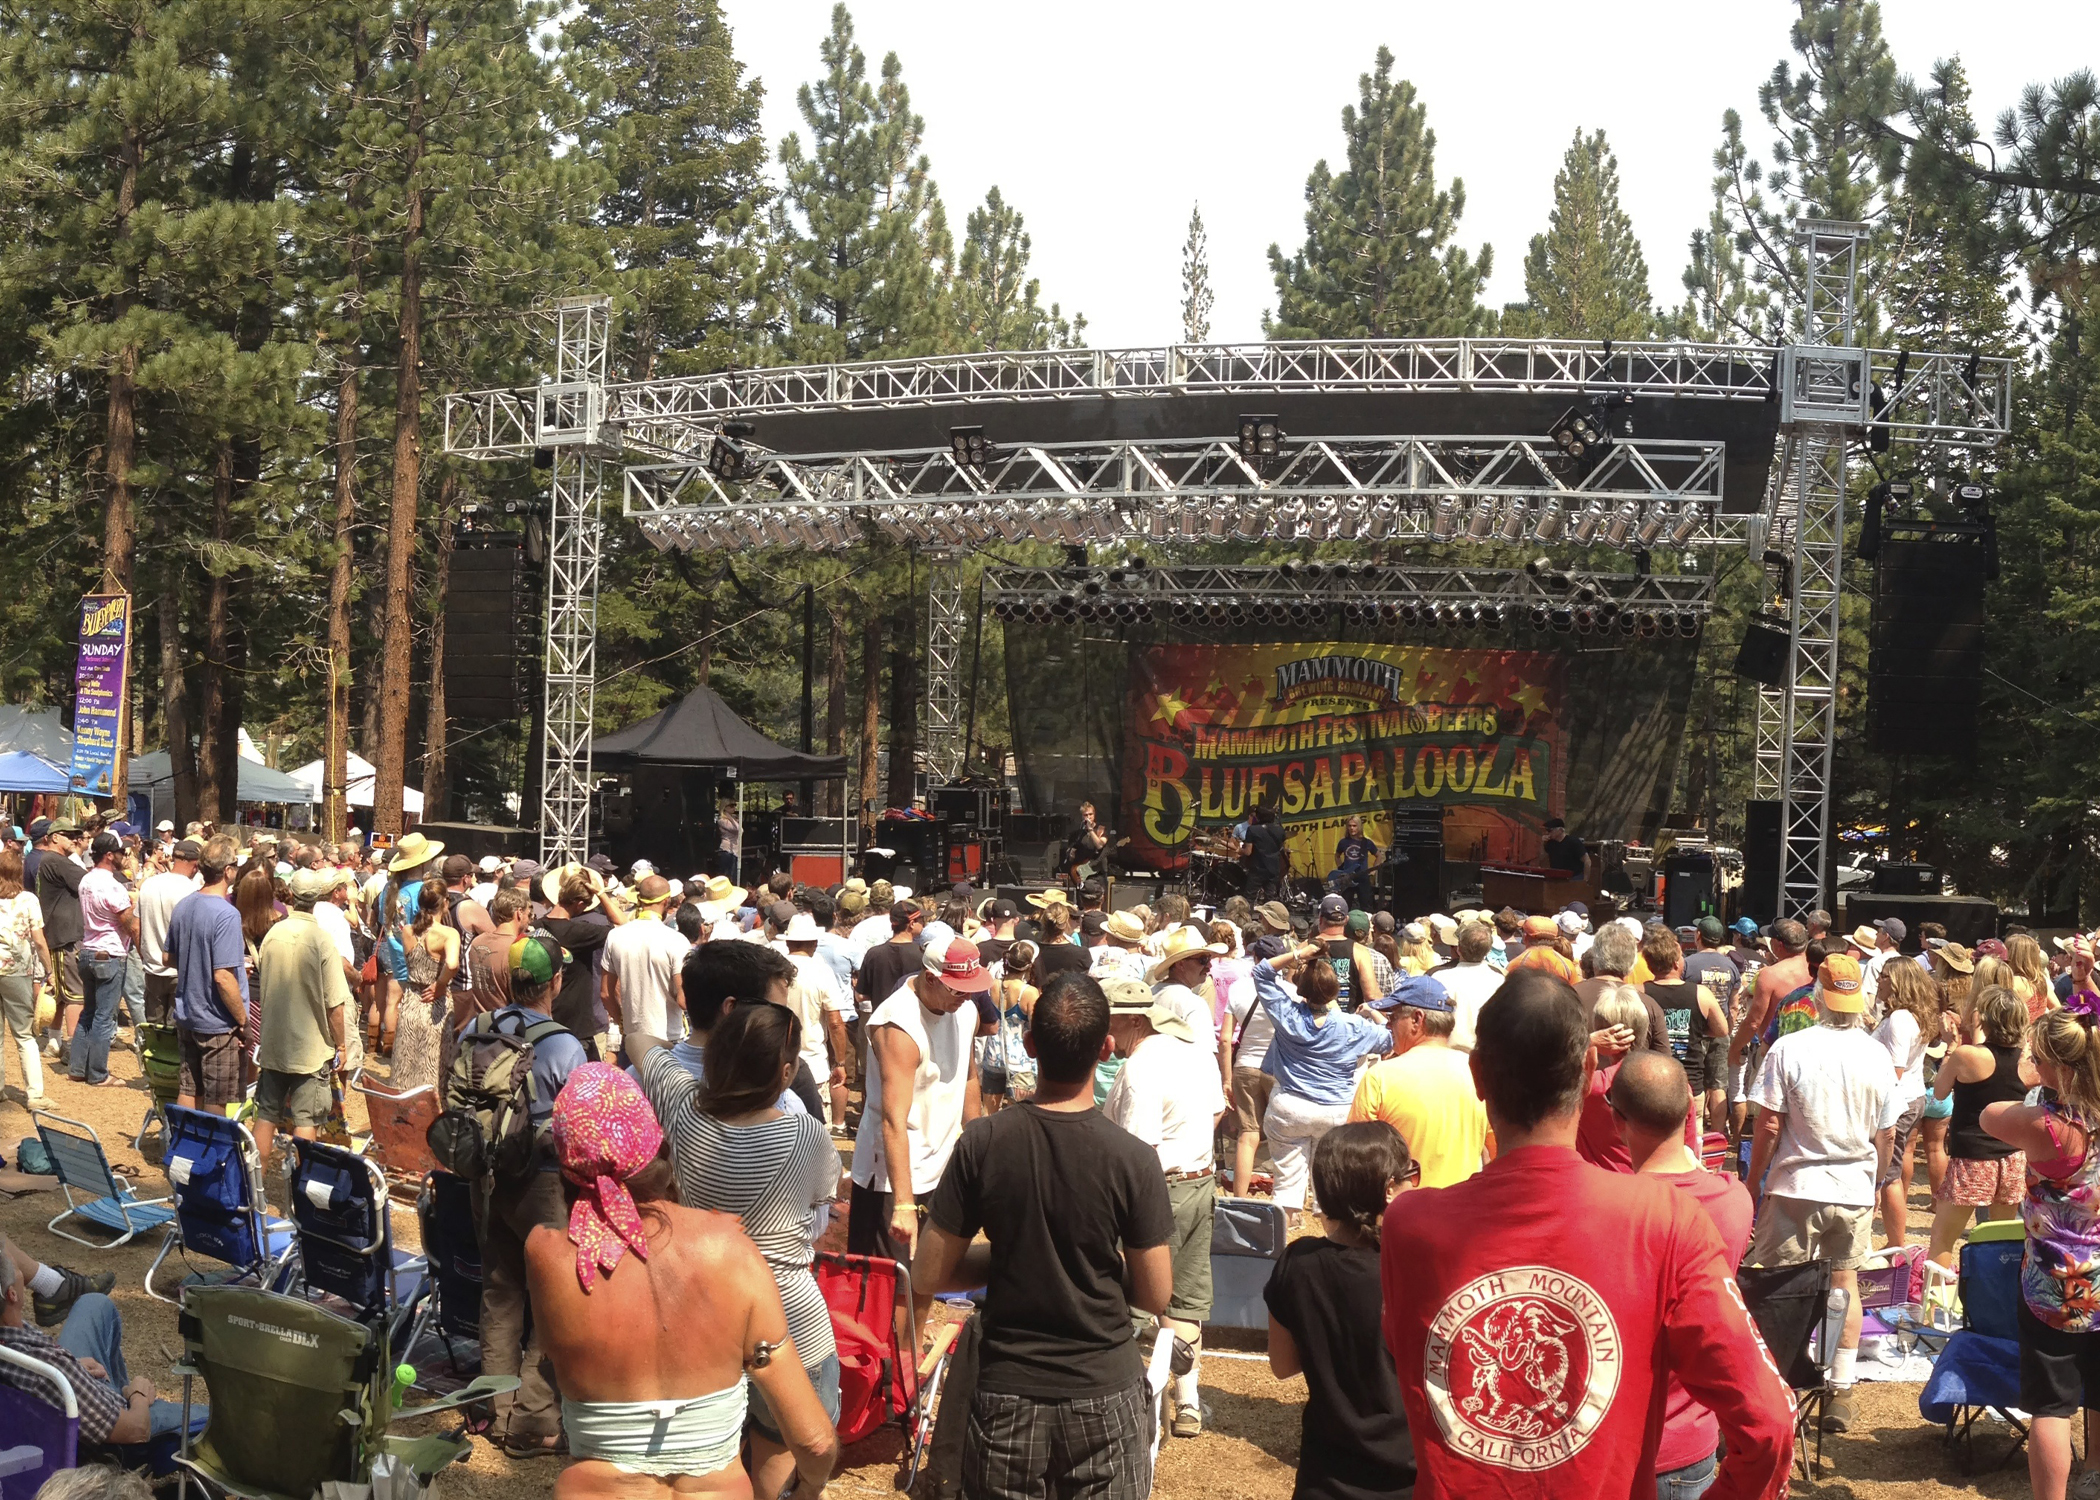 22nd Annual Mammoth Festival of Beers & Bluesapalooza unites the best in craft beer and legendary blues artists at altitude in California's High Sierra.